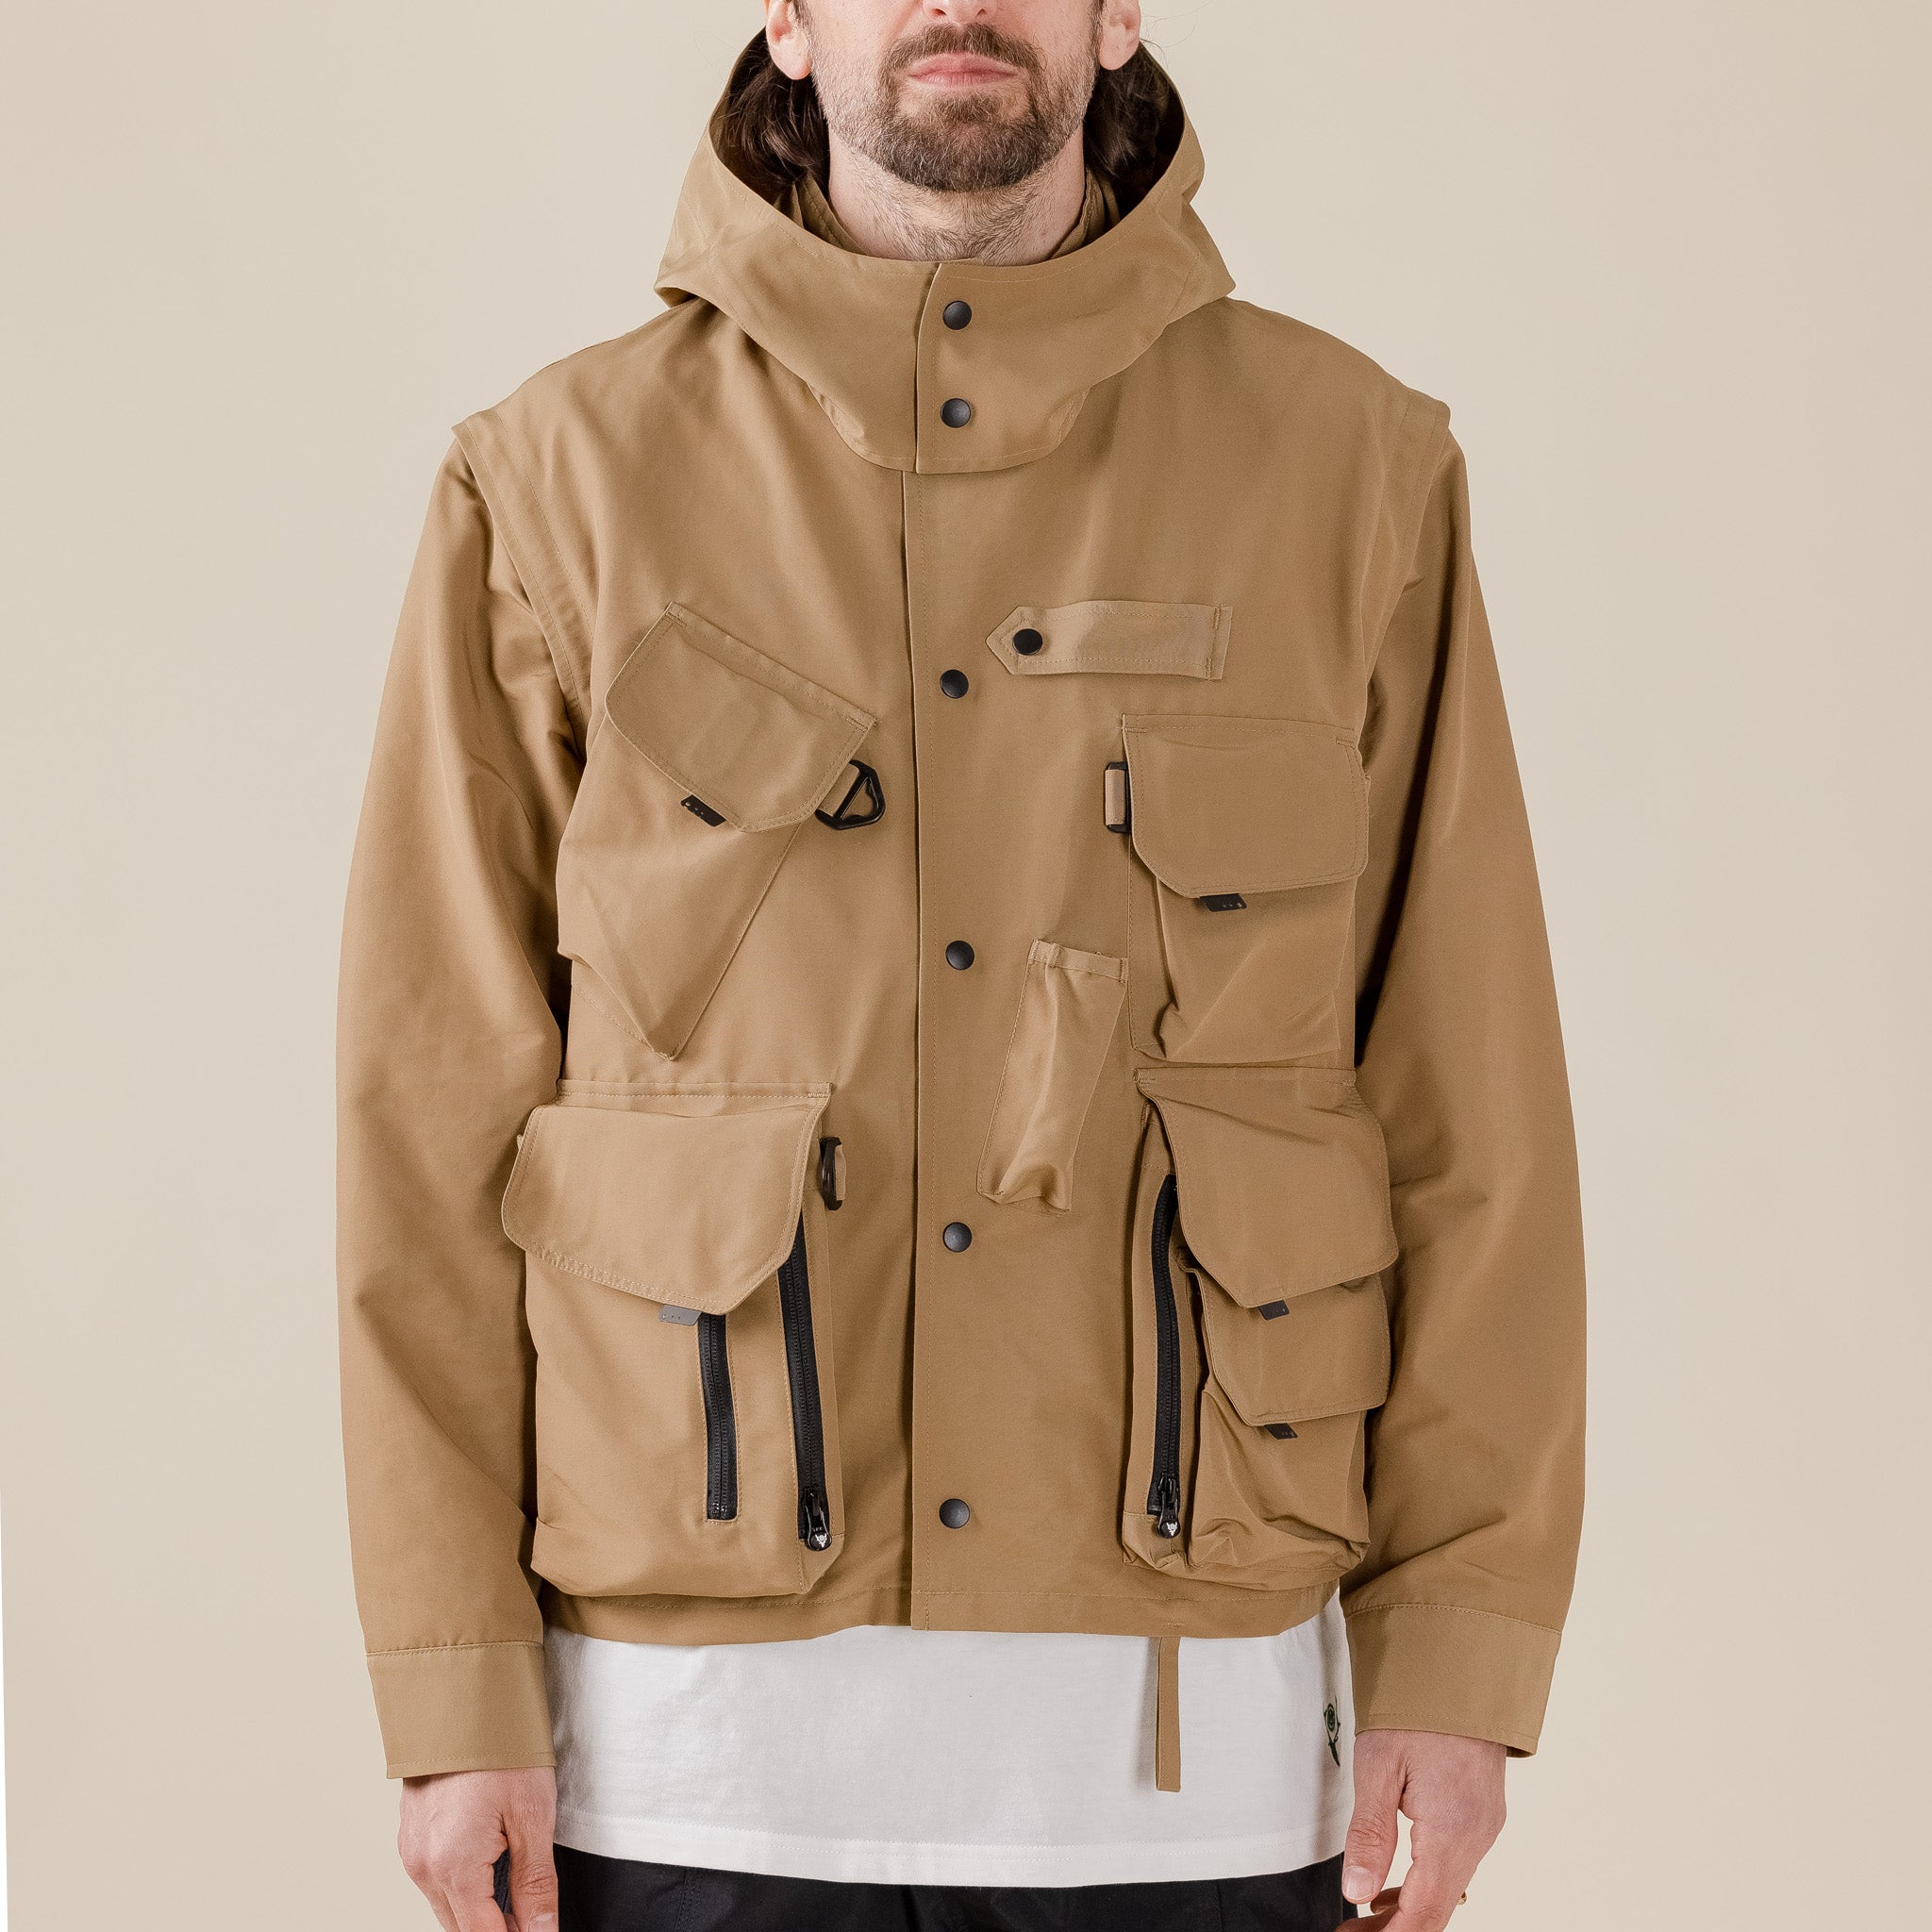 South2 West8 - South2 West8 Tenkara Trout Parka - C/N Grosgrain - Khaki "south 2 west 8" "s2w8" "s2w8 stockists" "south 2 west 8 stockists" "south 2 west 8 sale" "south 2 west 8 uk" "south 2 west 8 USA" "nepenthes" "nepenthes London"